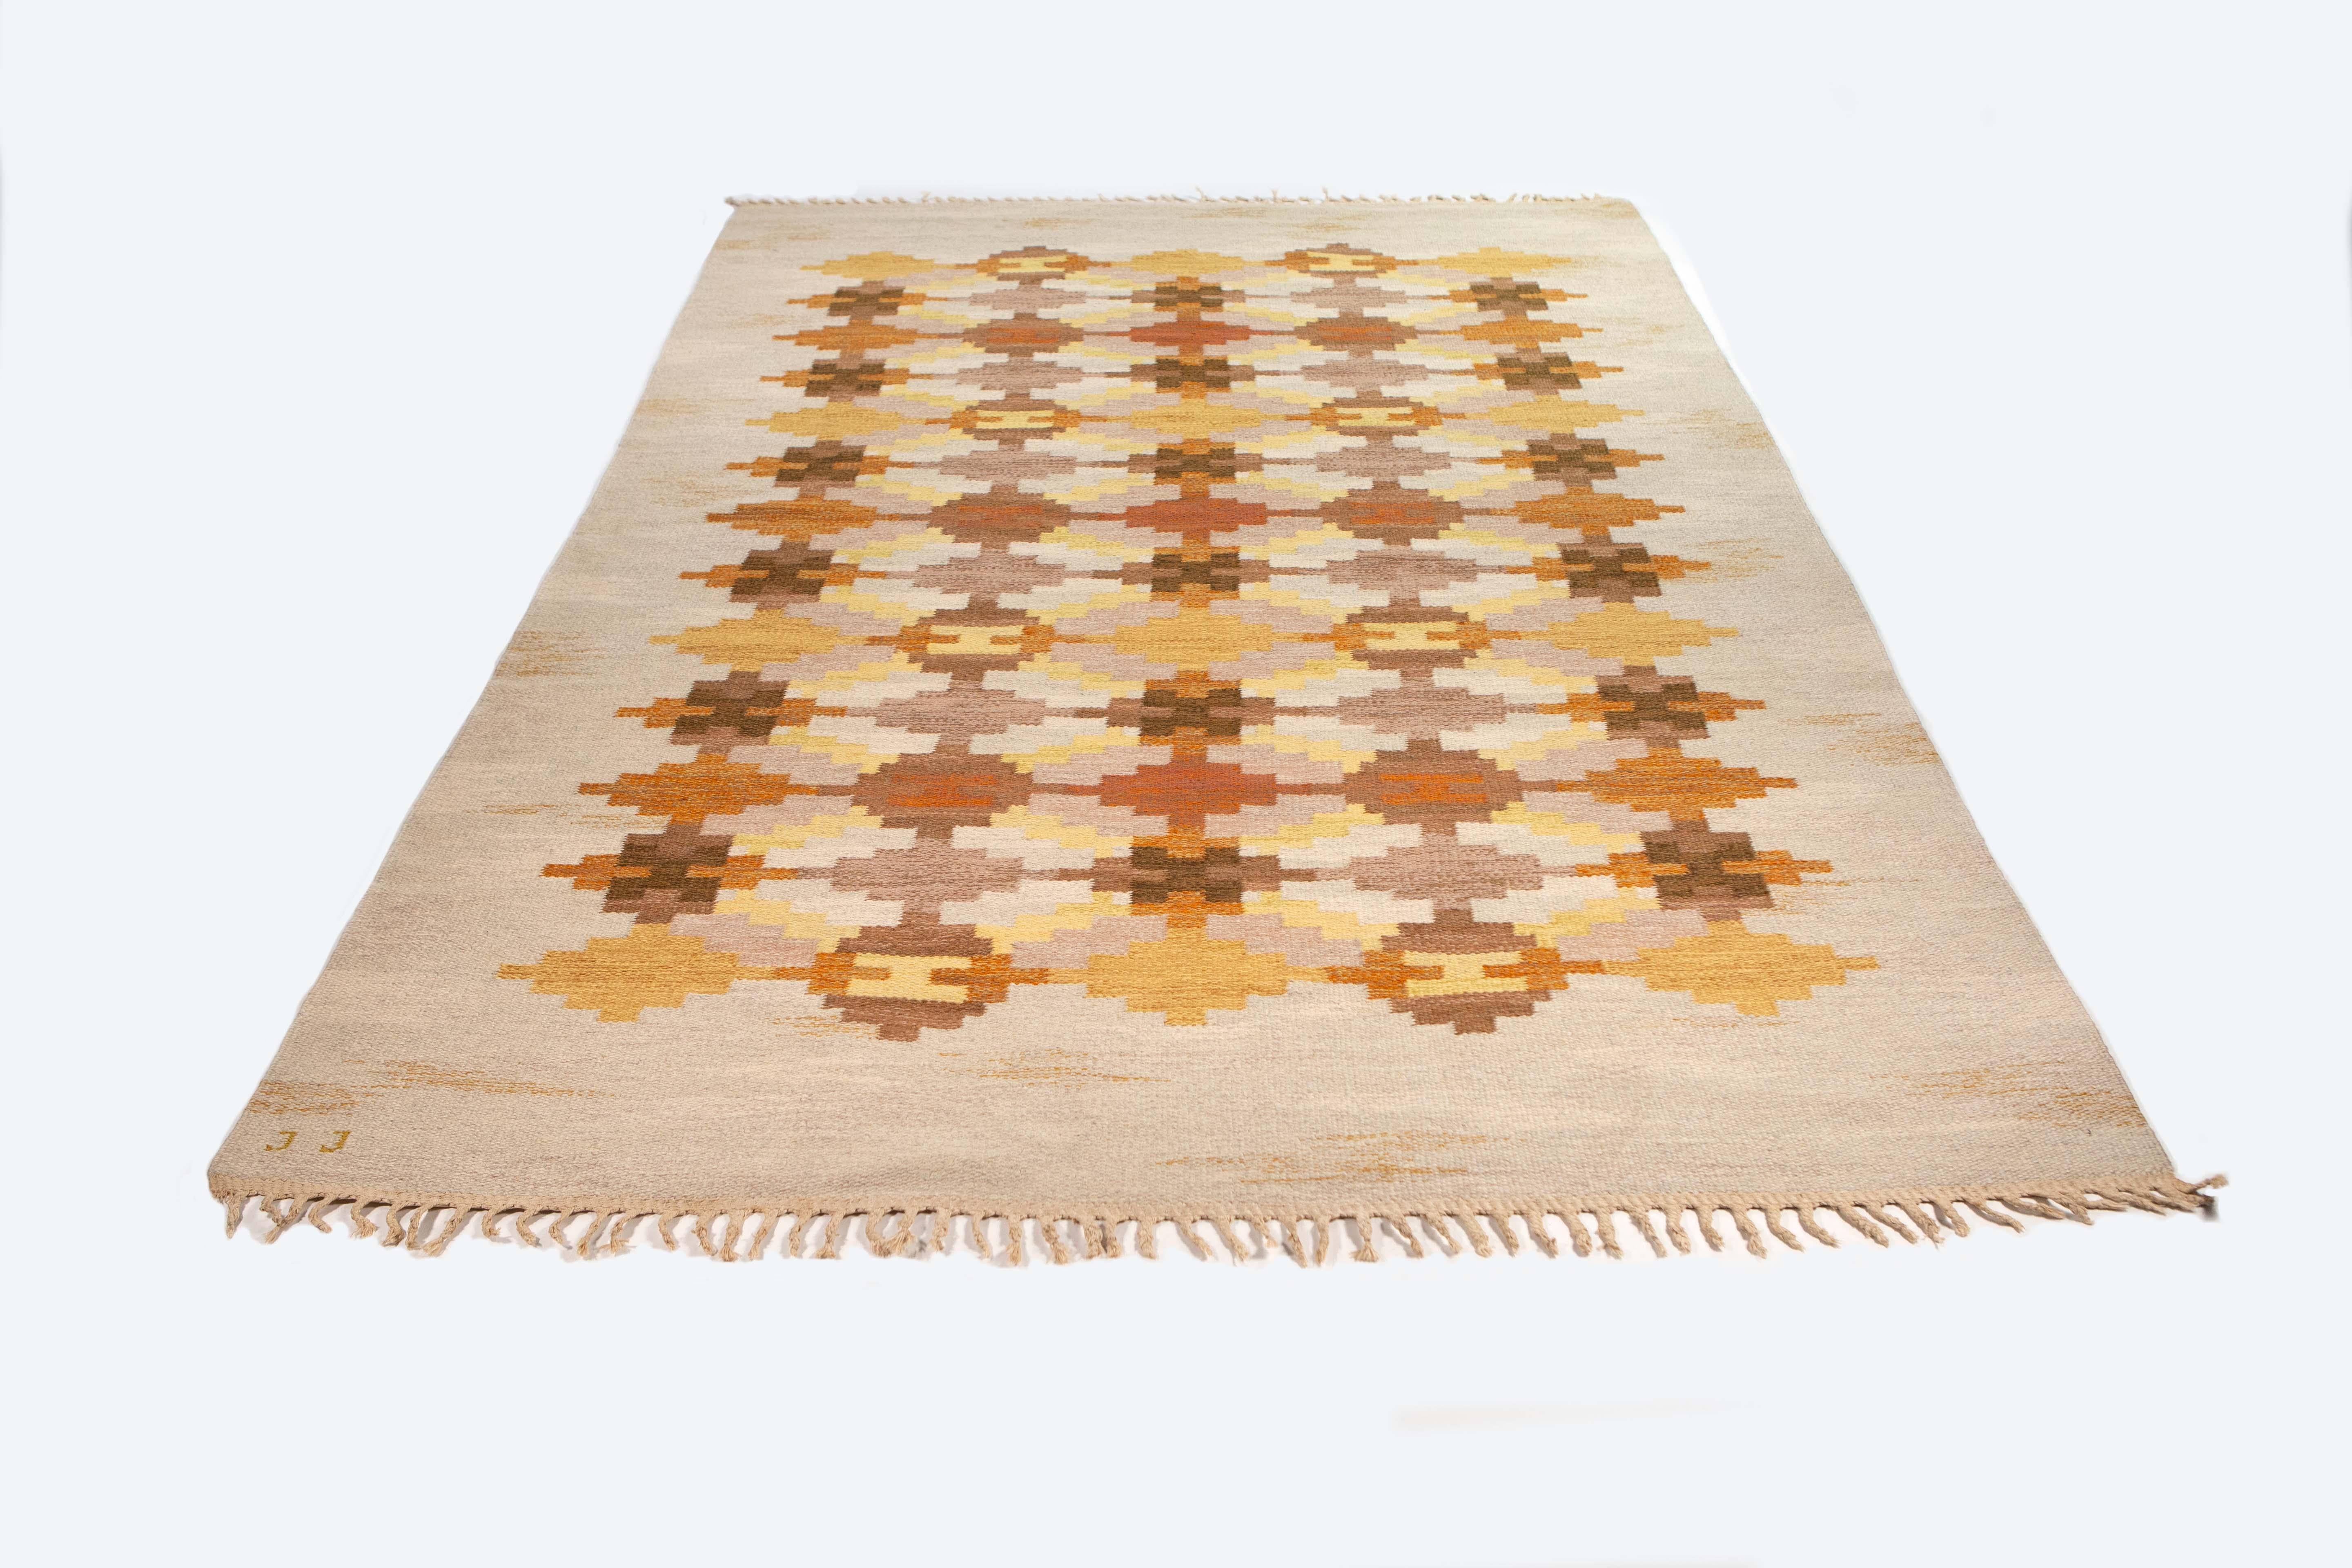 Judith Johansson handwoven flat-weave rug signed JJ Sweden 1960s 9.2 ft x 6.1 ft.

This is a classic and very sought after design and designer. Top class in Swedish designer handwoven rug. 

Size: 280cm x 186cm or 110in x 73in (9.2 ft x 6.1